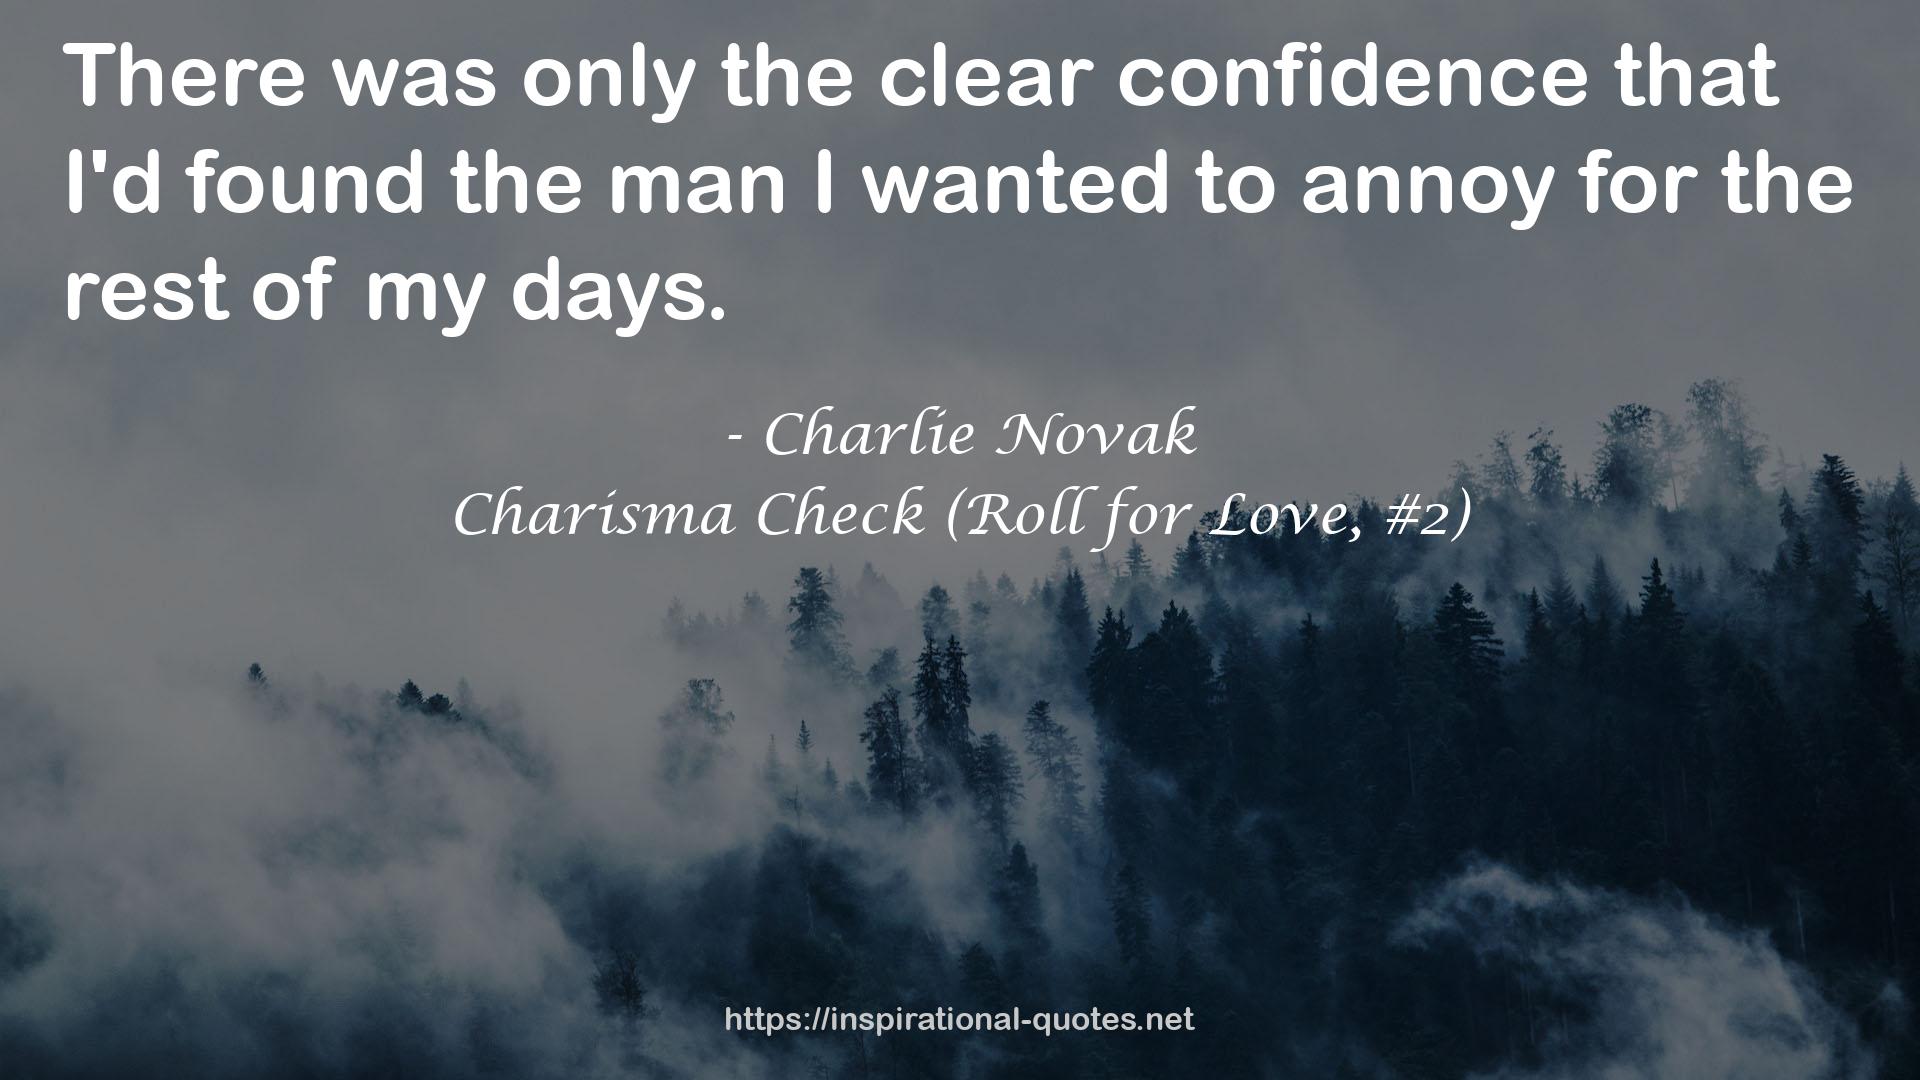 Charisma Check (Roll for Love, #2) QUOTES